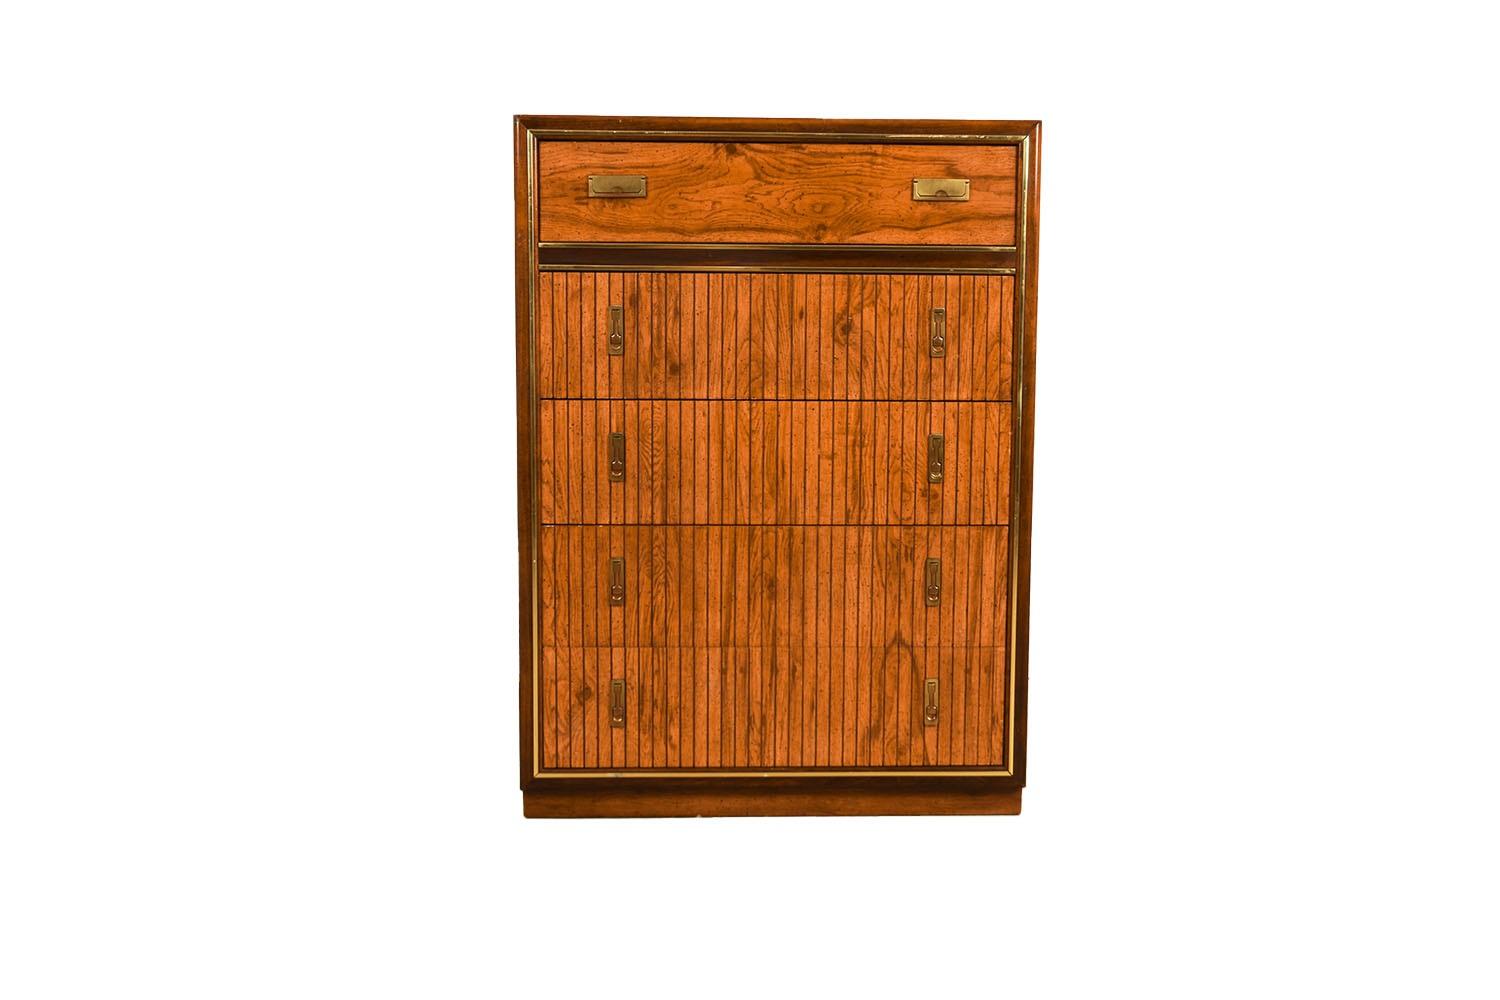 An elegant mid-century tallboy dresser. This is a beautiful example of Mid-Century craftsmanship. This retro piece was constructed with top of the line hardware, and excellently crafted woodwork. Features solid hardwood, with a two-tone walnut